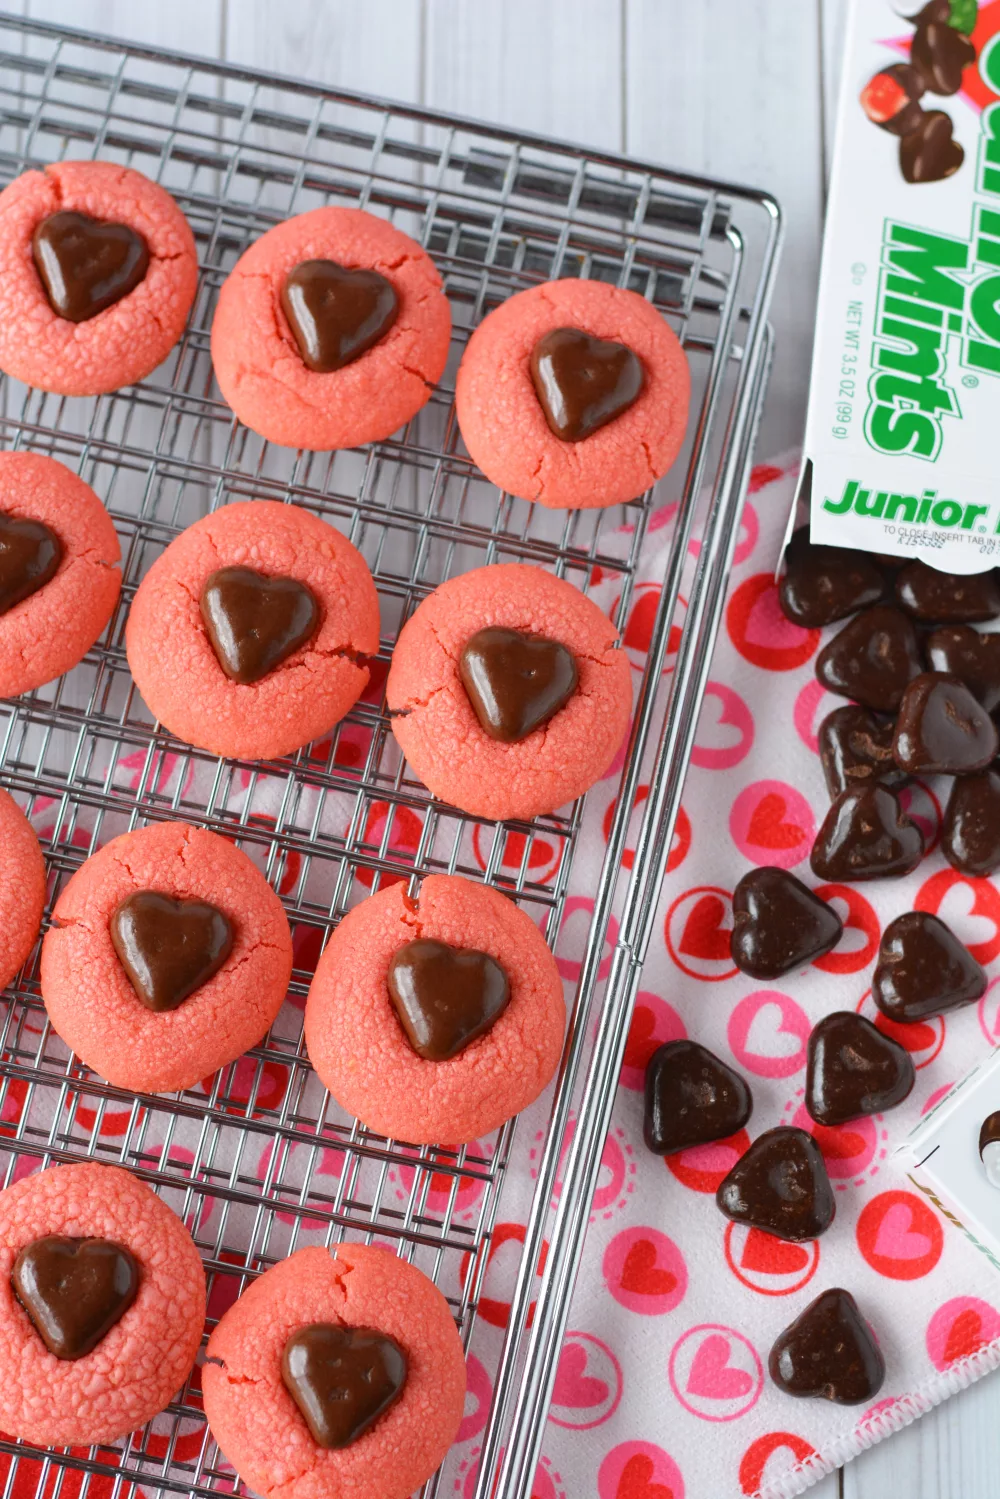 Junior Mint ingredients: Junior Mint box of candies and heart shaped pink cookies